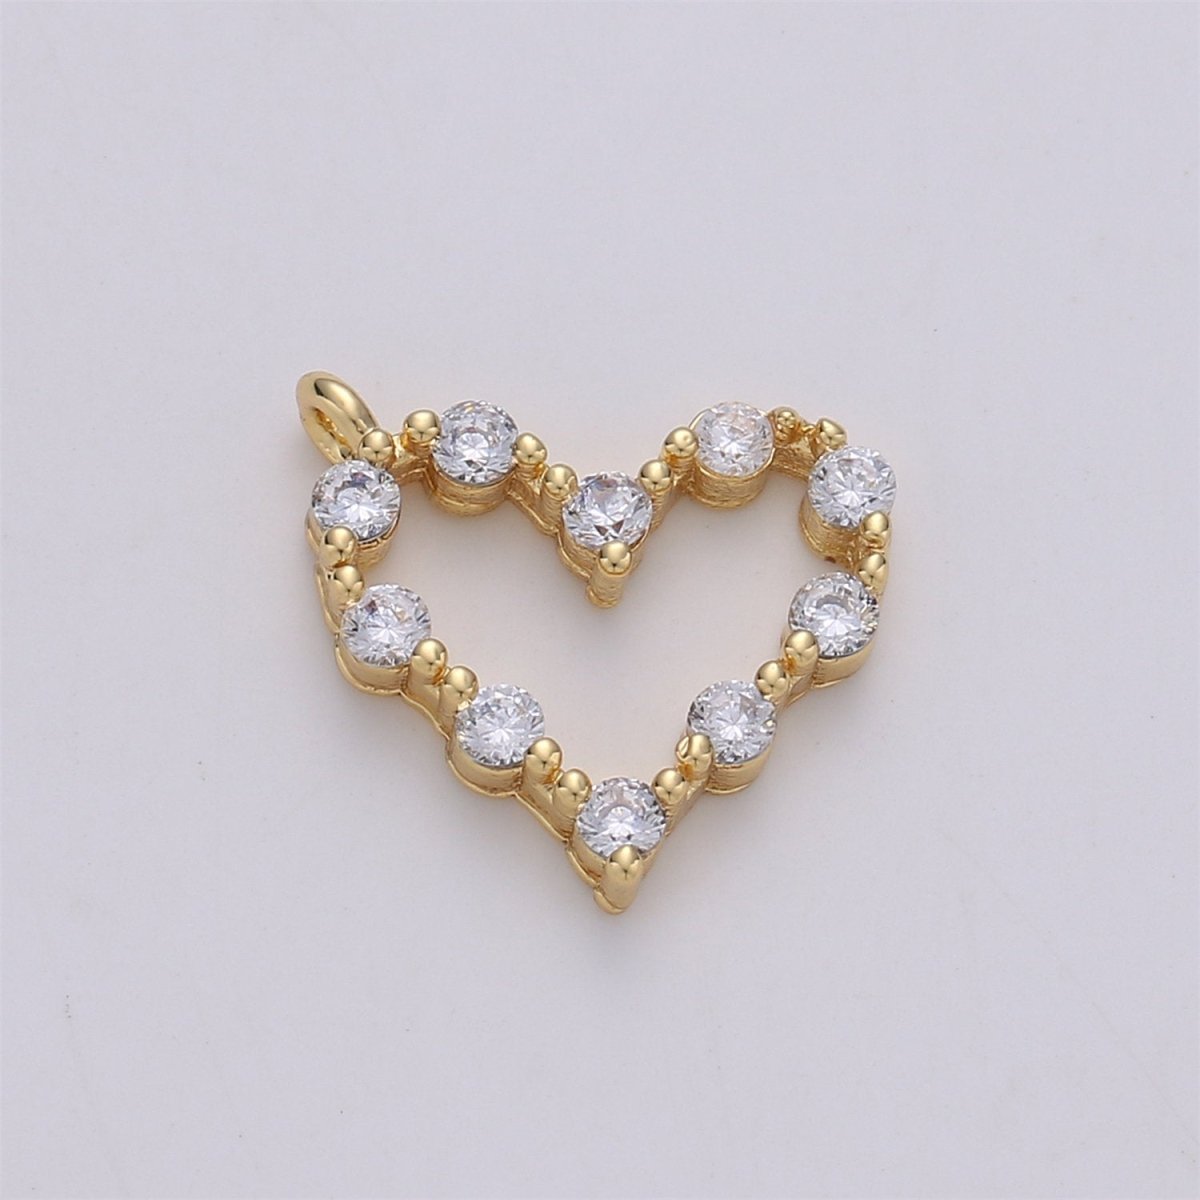 24K Gold Filled Dainty Cute Heart Charm with Love Micro Pave Cubic Zirconia CZ Stone for Necklace or Bracelet, C-887 - DLUXCA